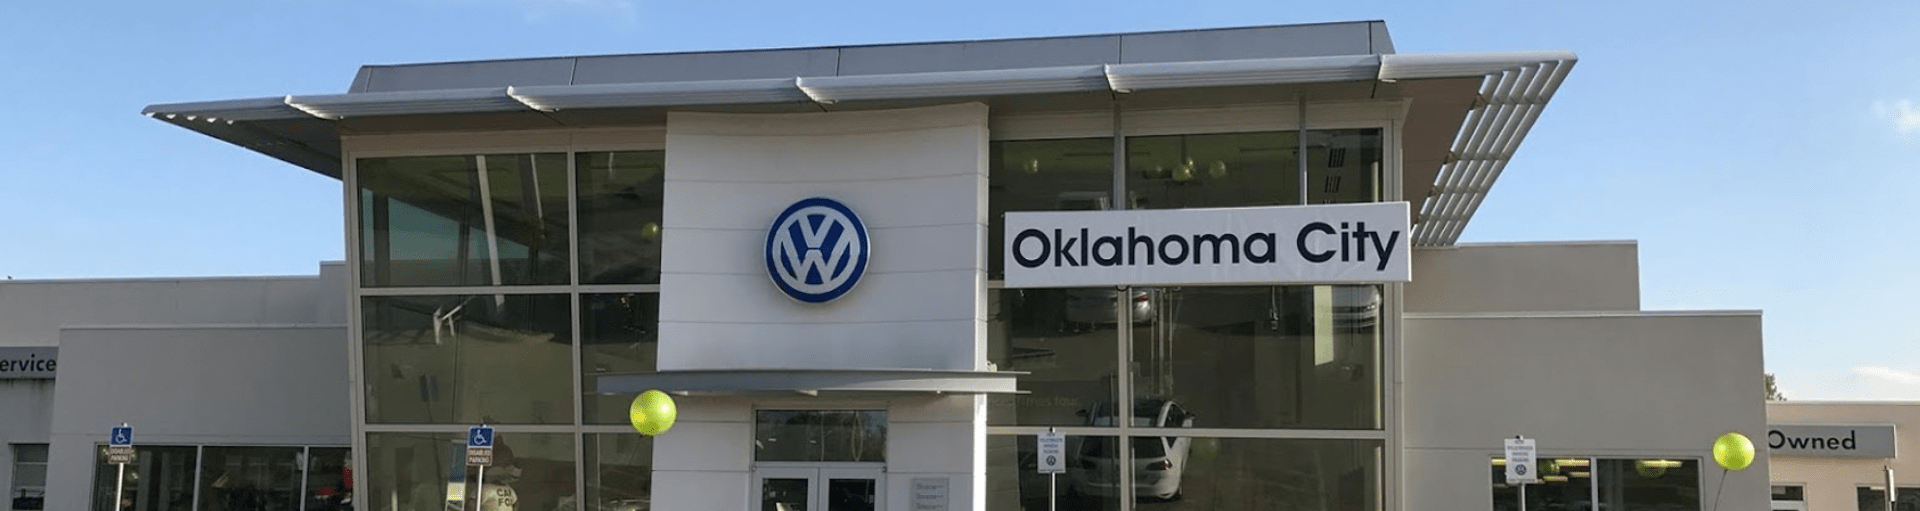 Oklahoma City Volkswagen Front Brake Pad Replacement Service